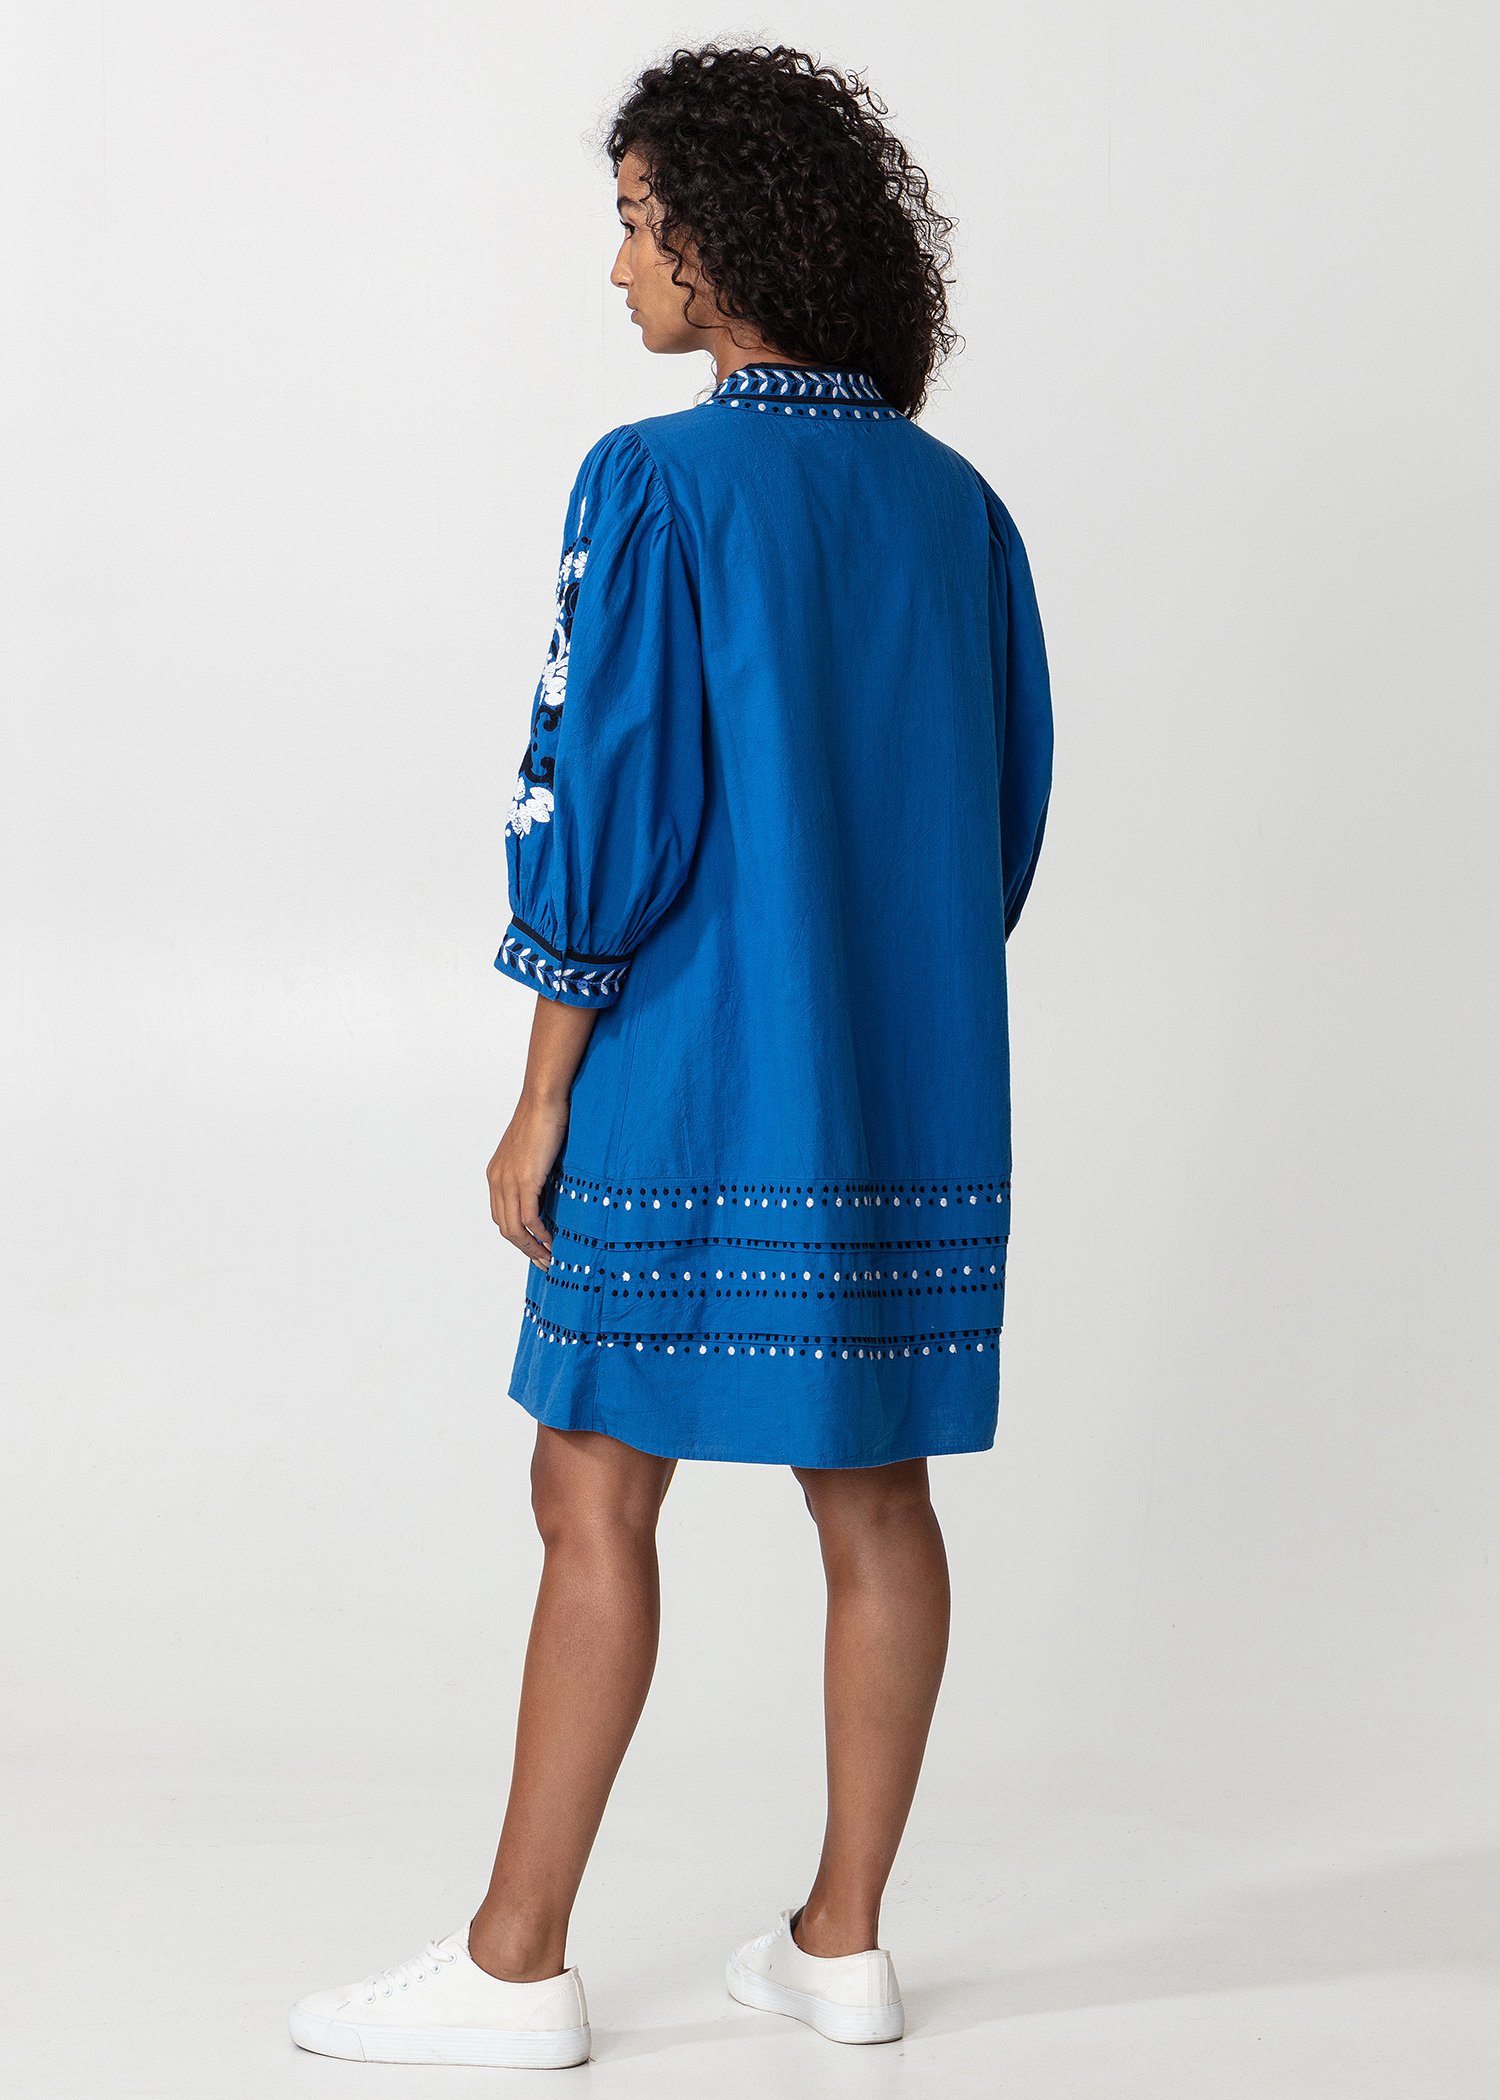 Embroidered tunic with tassels Image 8